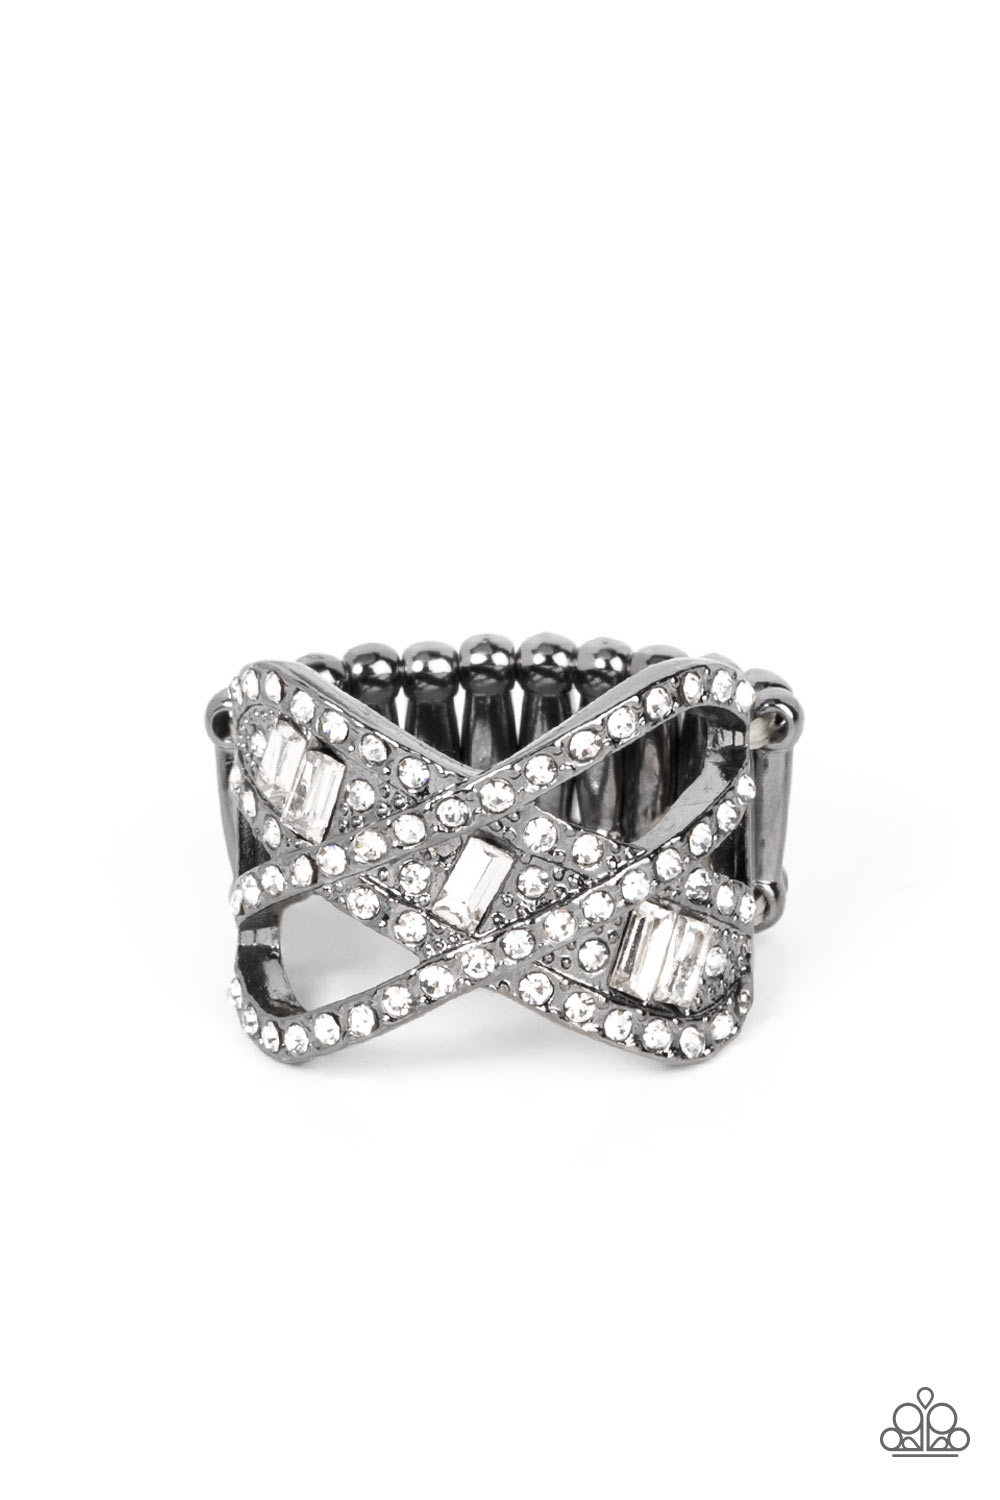 Triple Threat Twinkle - Black Ring - Paparazzi Accessories